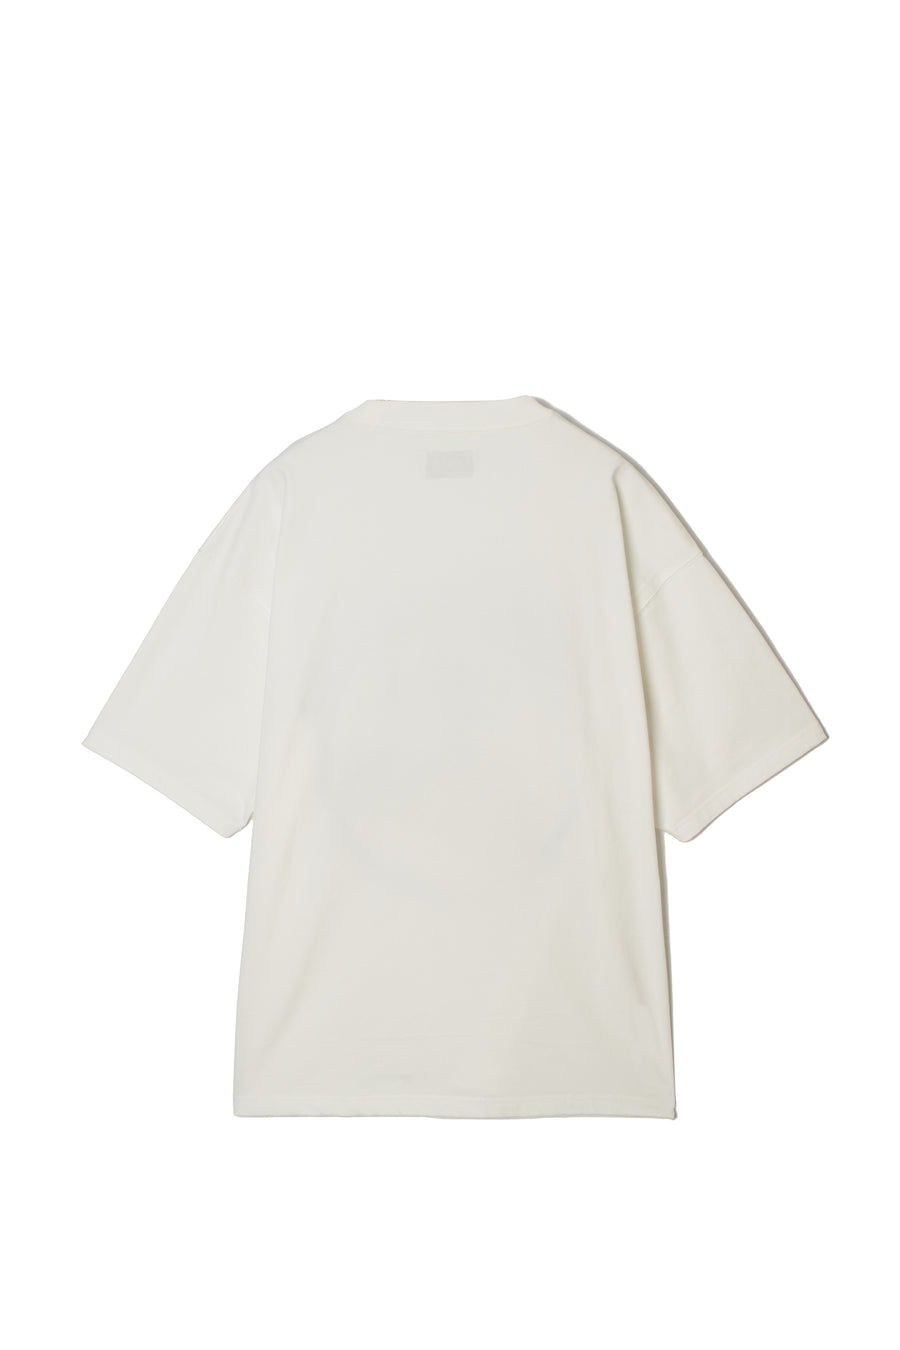 FORGET ME NOT MAYO Embroidery short Sleeve Tee - WHITE